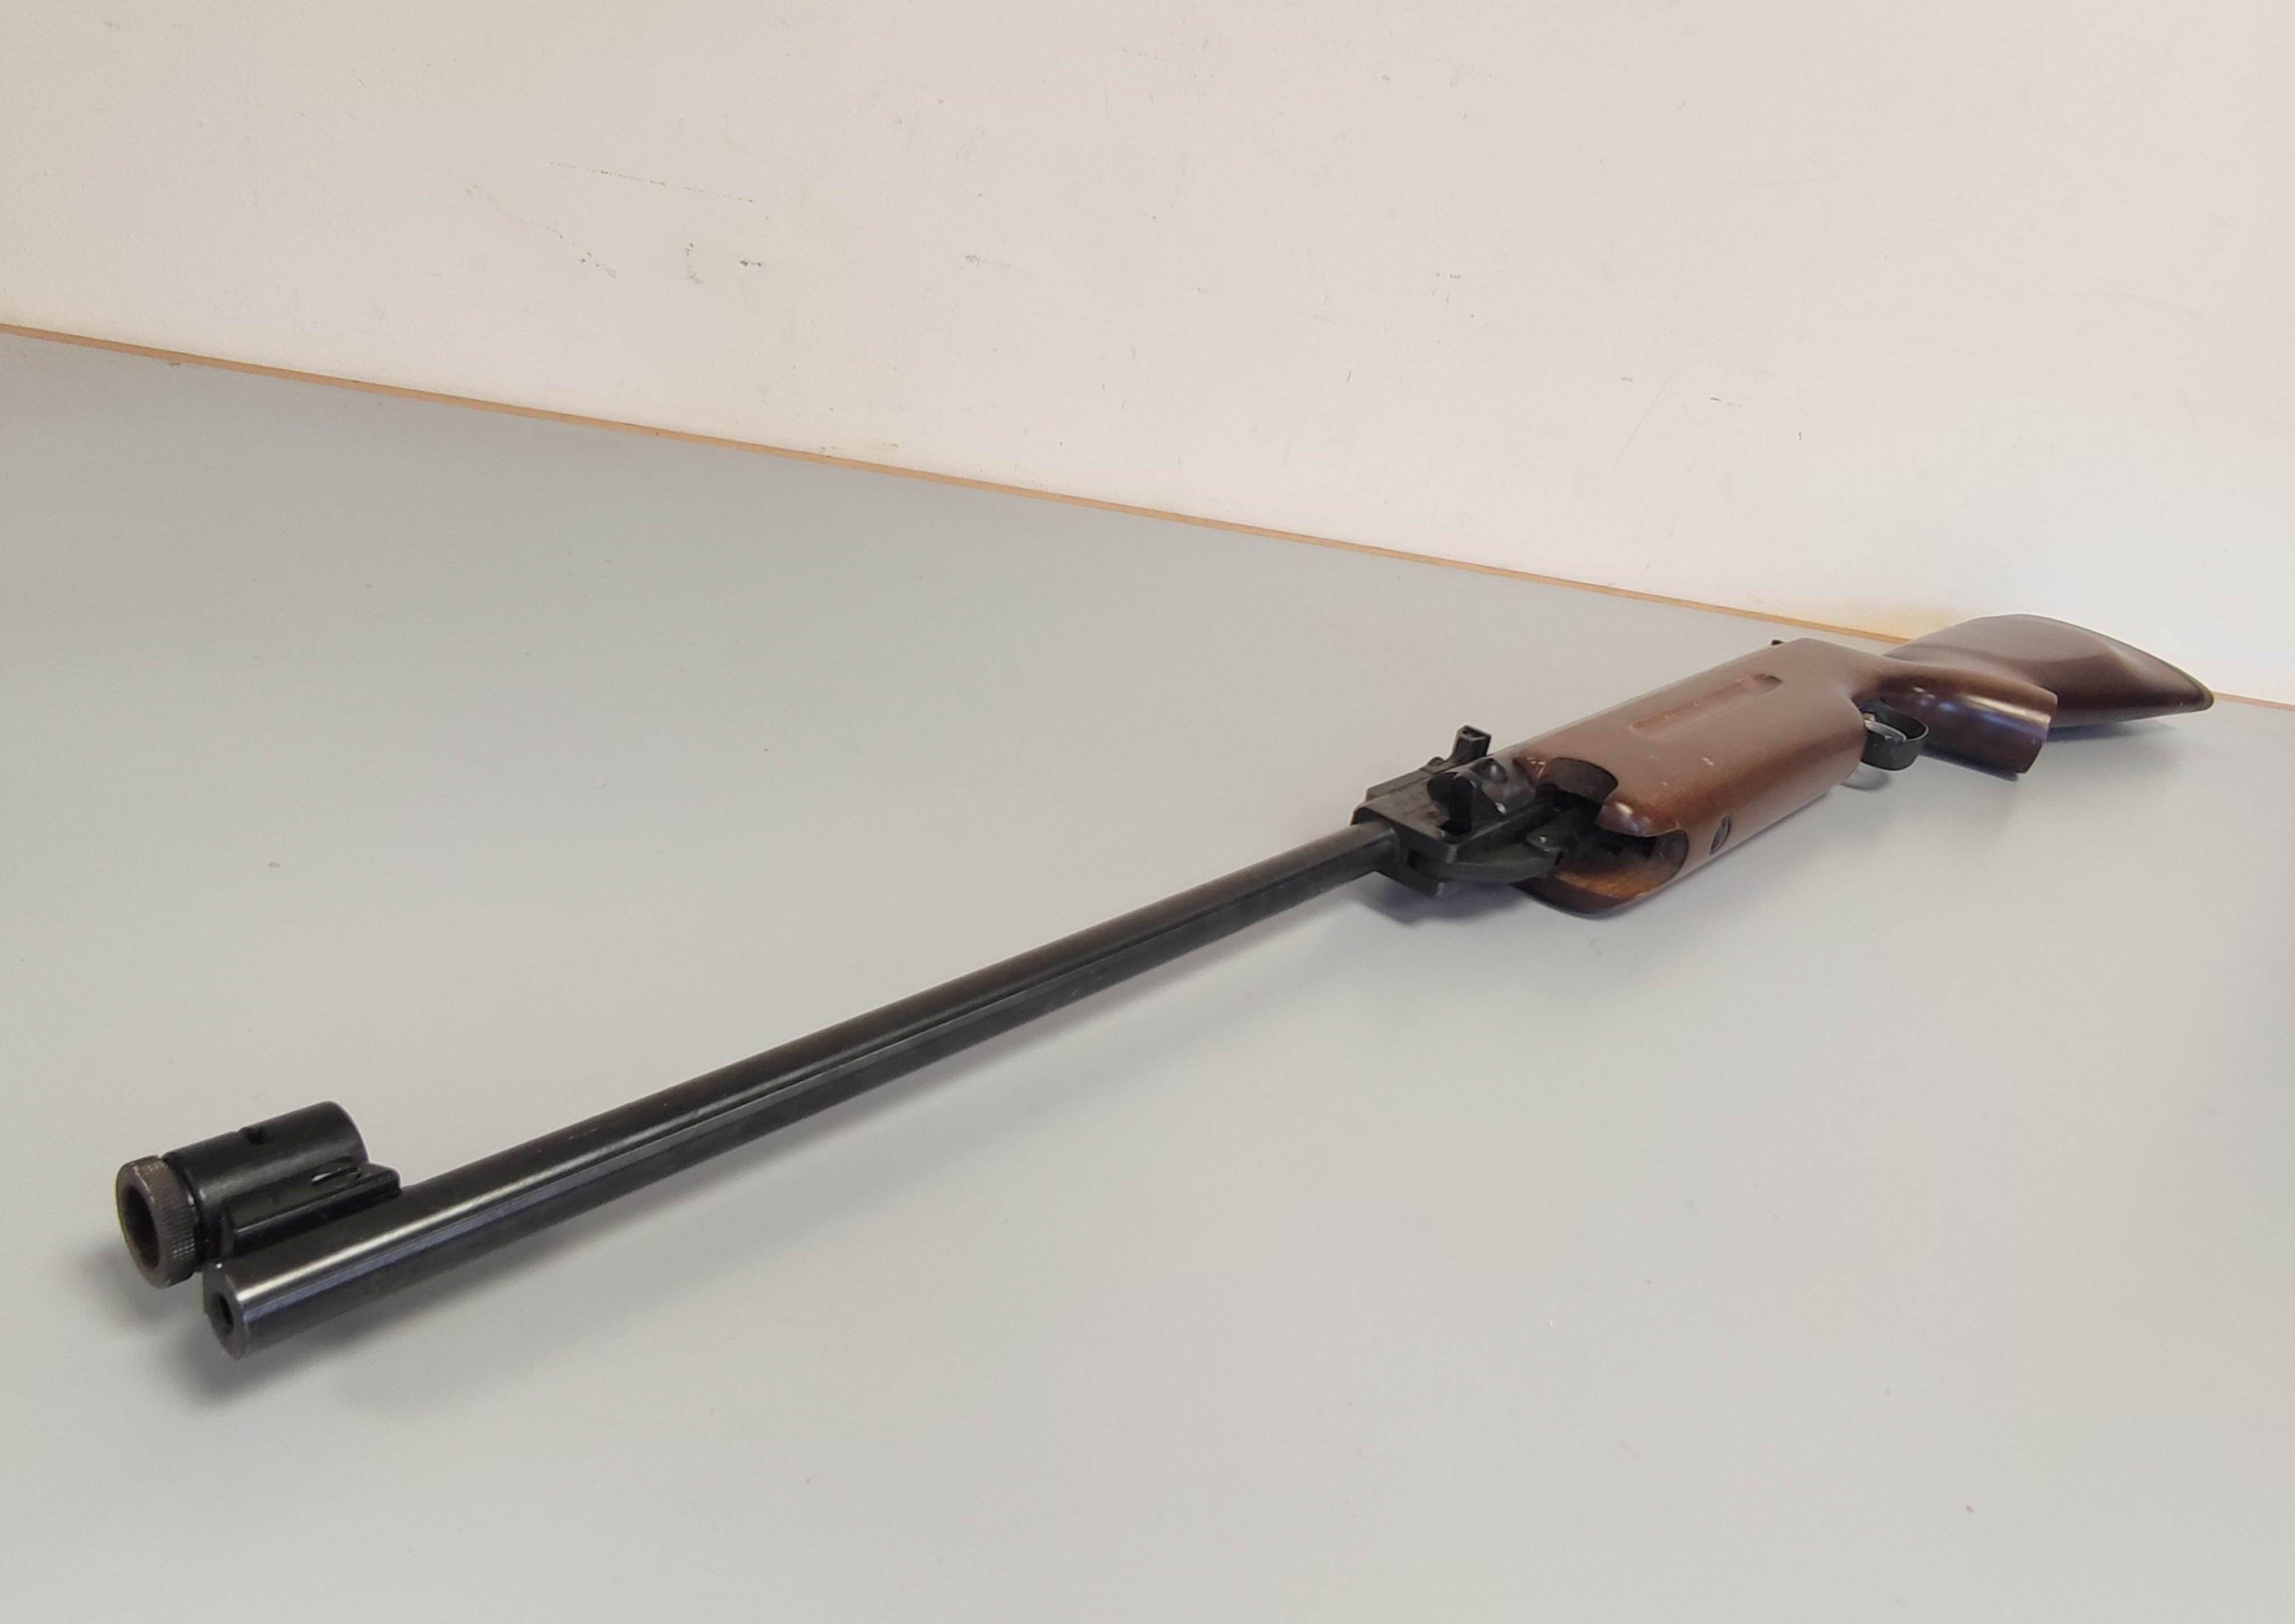 WEIHRAUCH HW35K Kal 5.5 .22 break barrel air rifle serial no 1431511 with ring sight. - Image 2 of 6